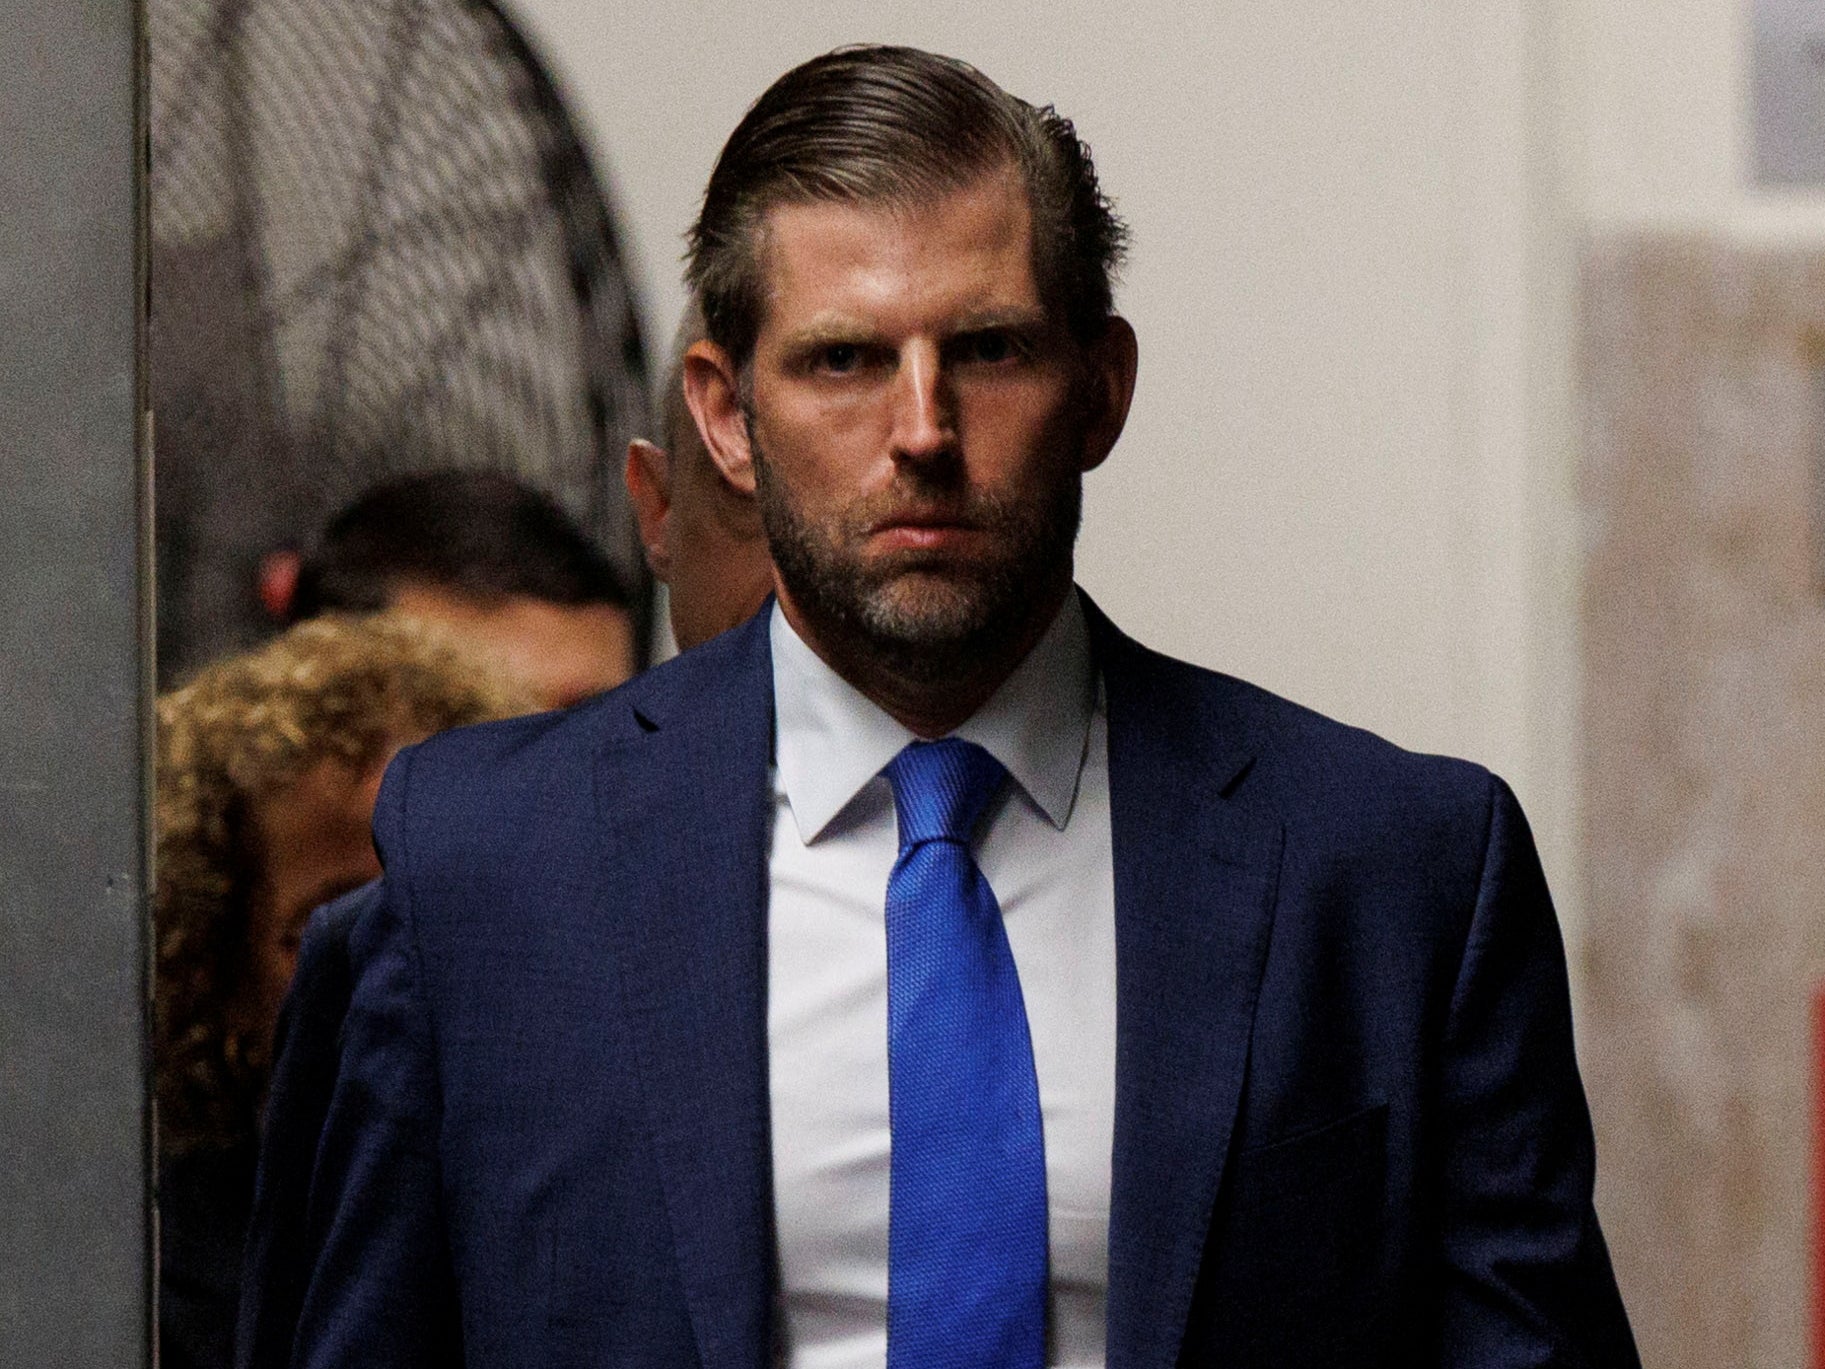 Eric Trump, the son of former US president Donald Trump, attends his father’s criminal trial in New York on Monday 13 May 2024